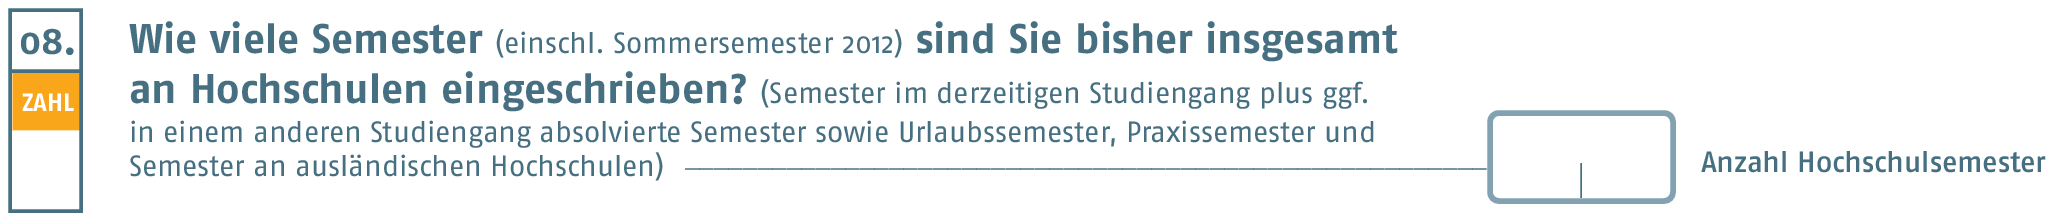 For how many semesters (incl. Summer Semester 2012) have you been enrolled at the university in total?